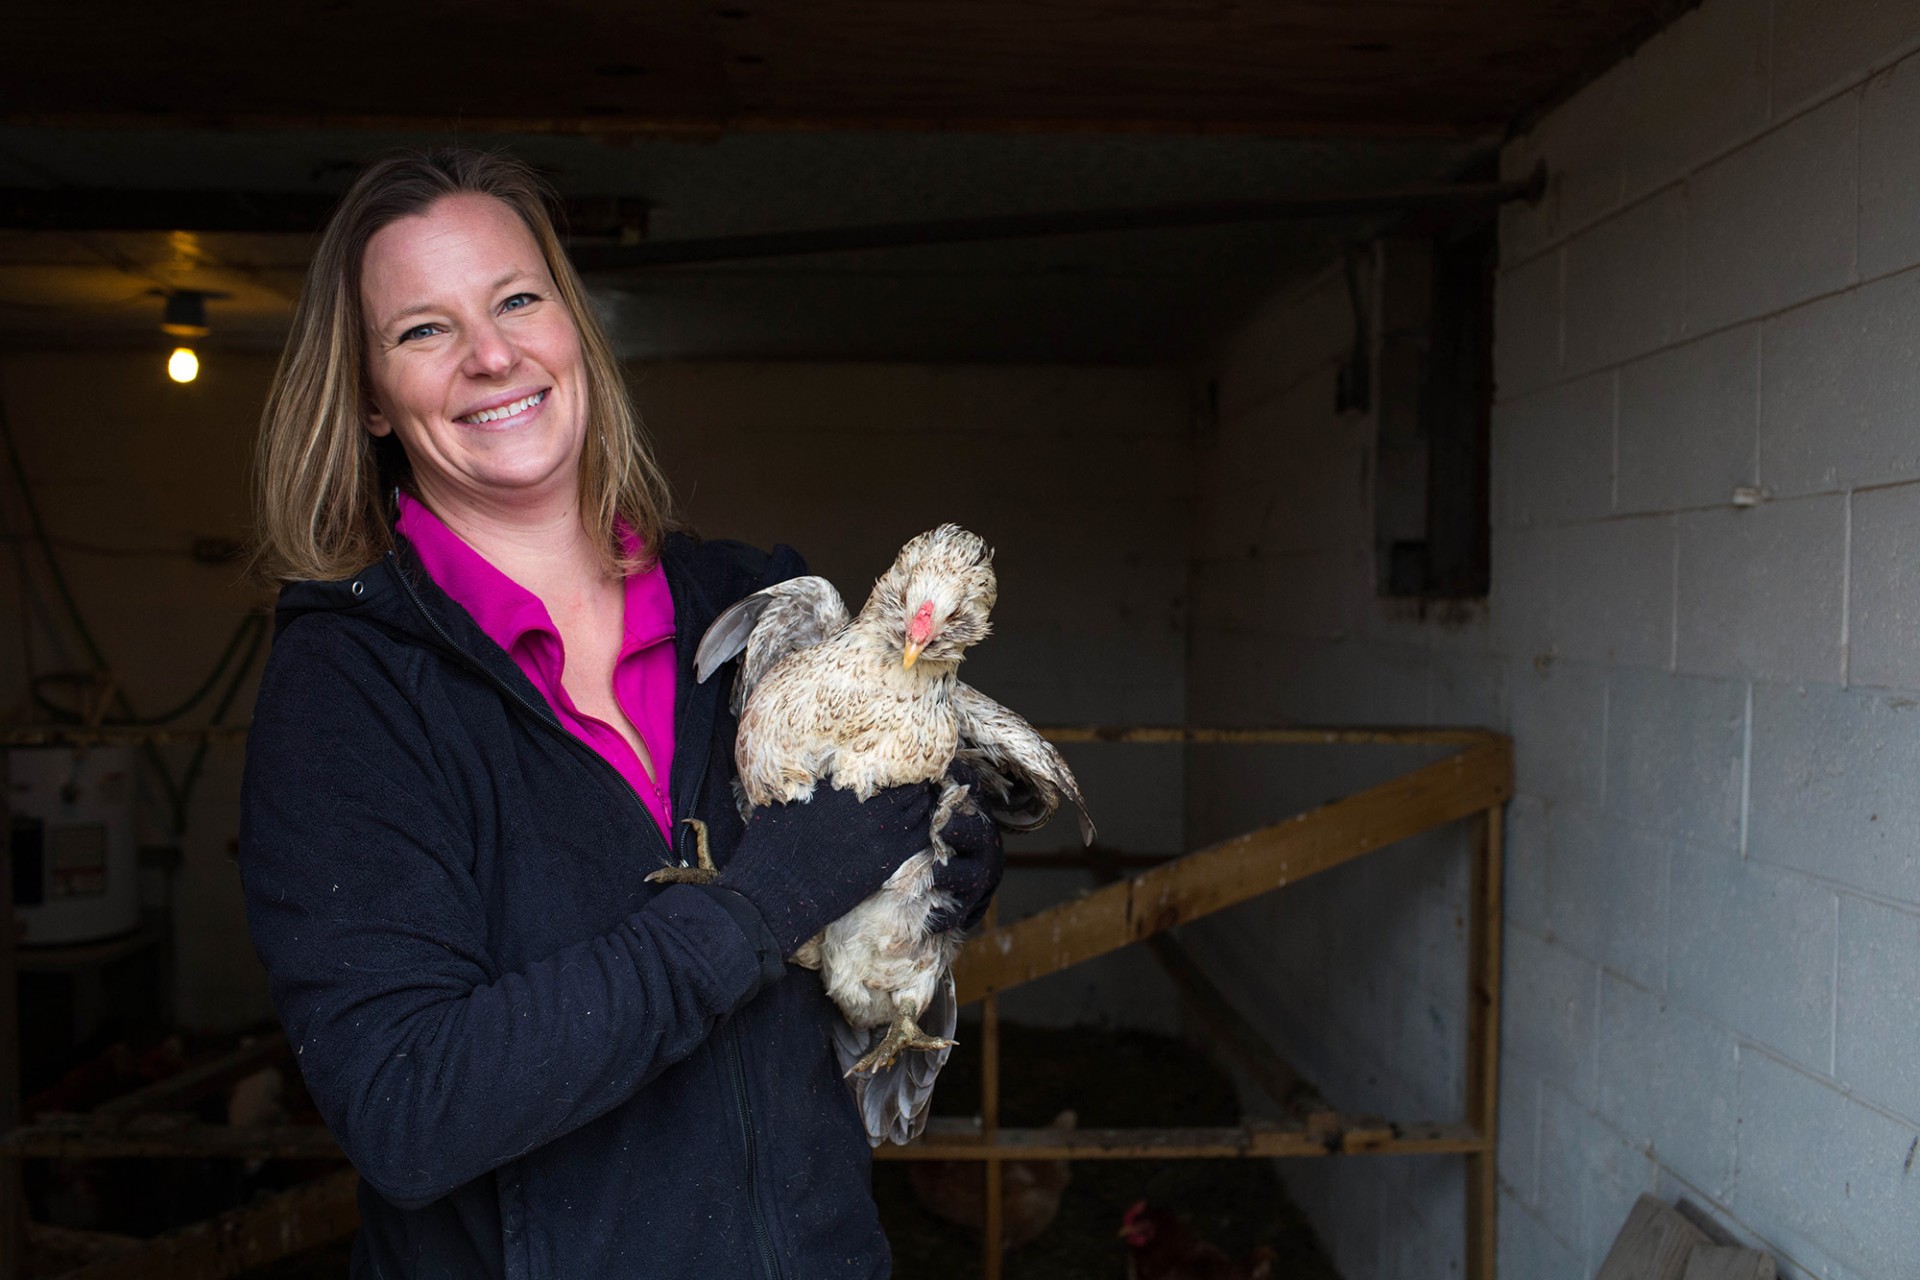 Three years ago, Air Force veteran Sara Creech quit her job as a nurse and bought a 43-acre farm in North Salem, Ind. She named her farm Blue Yonder Organic. Photo: John Wendle for Harvest Public Media